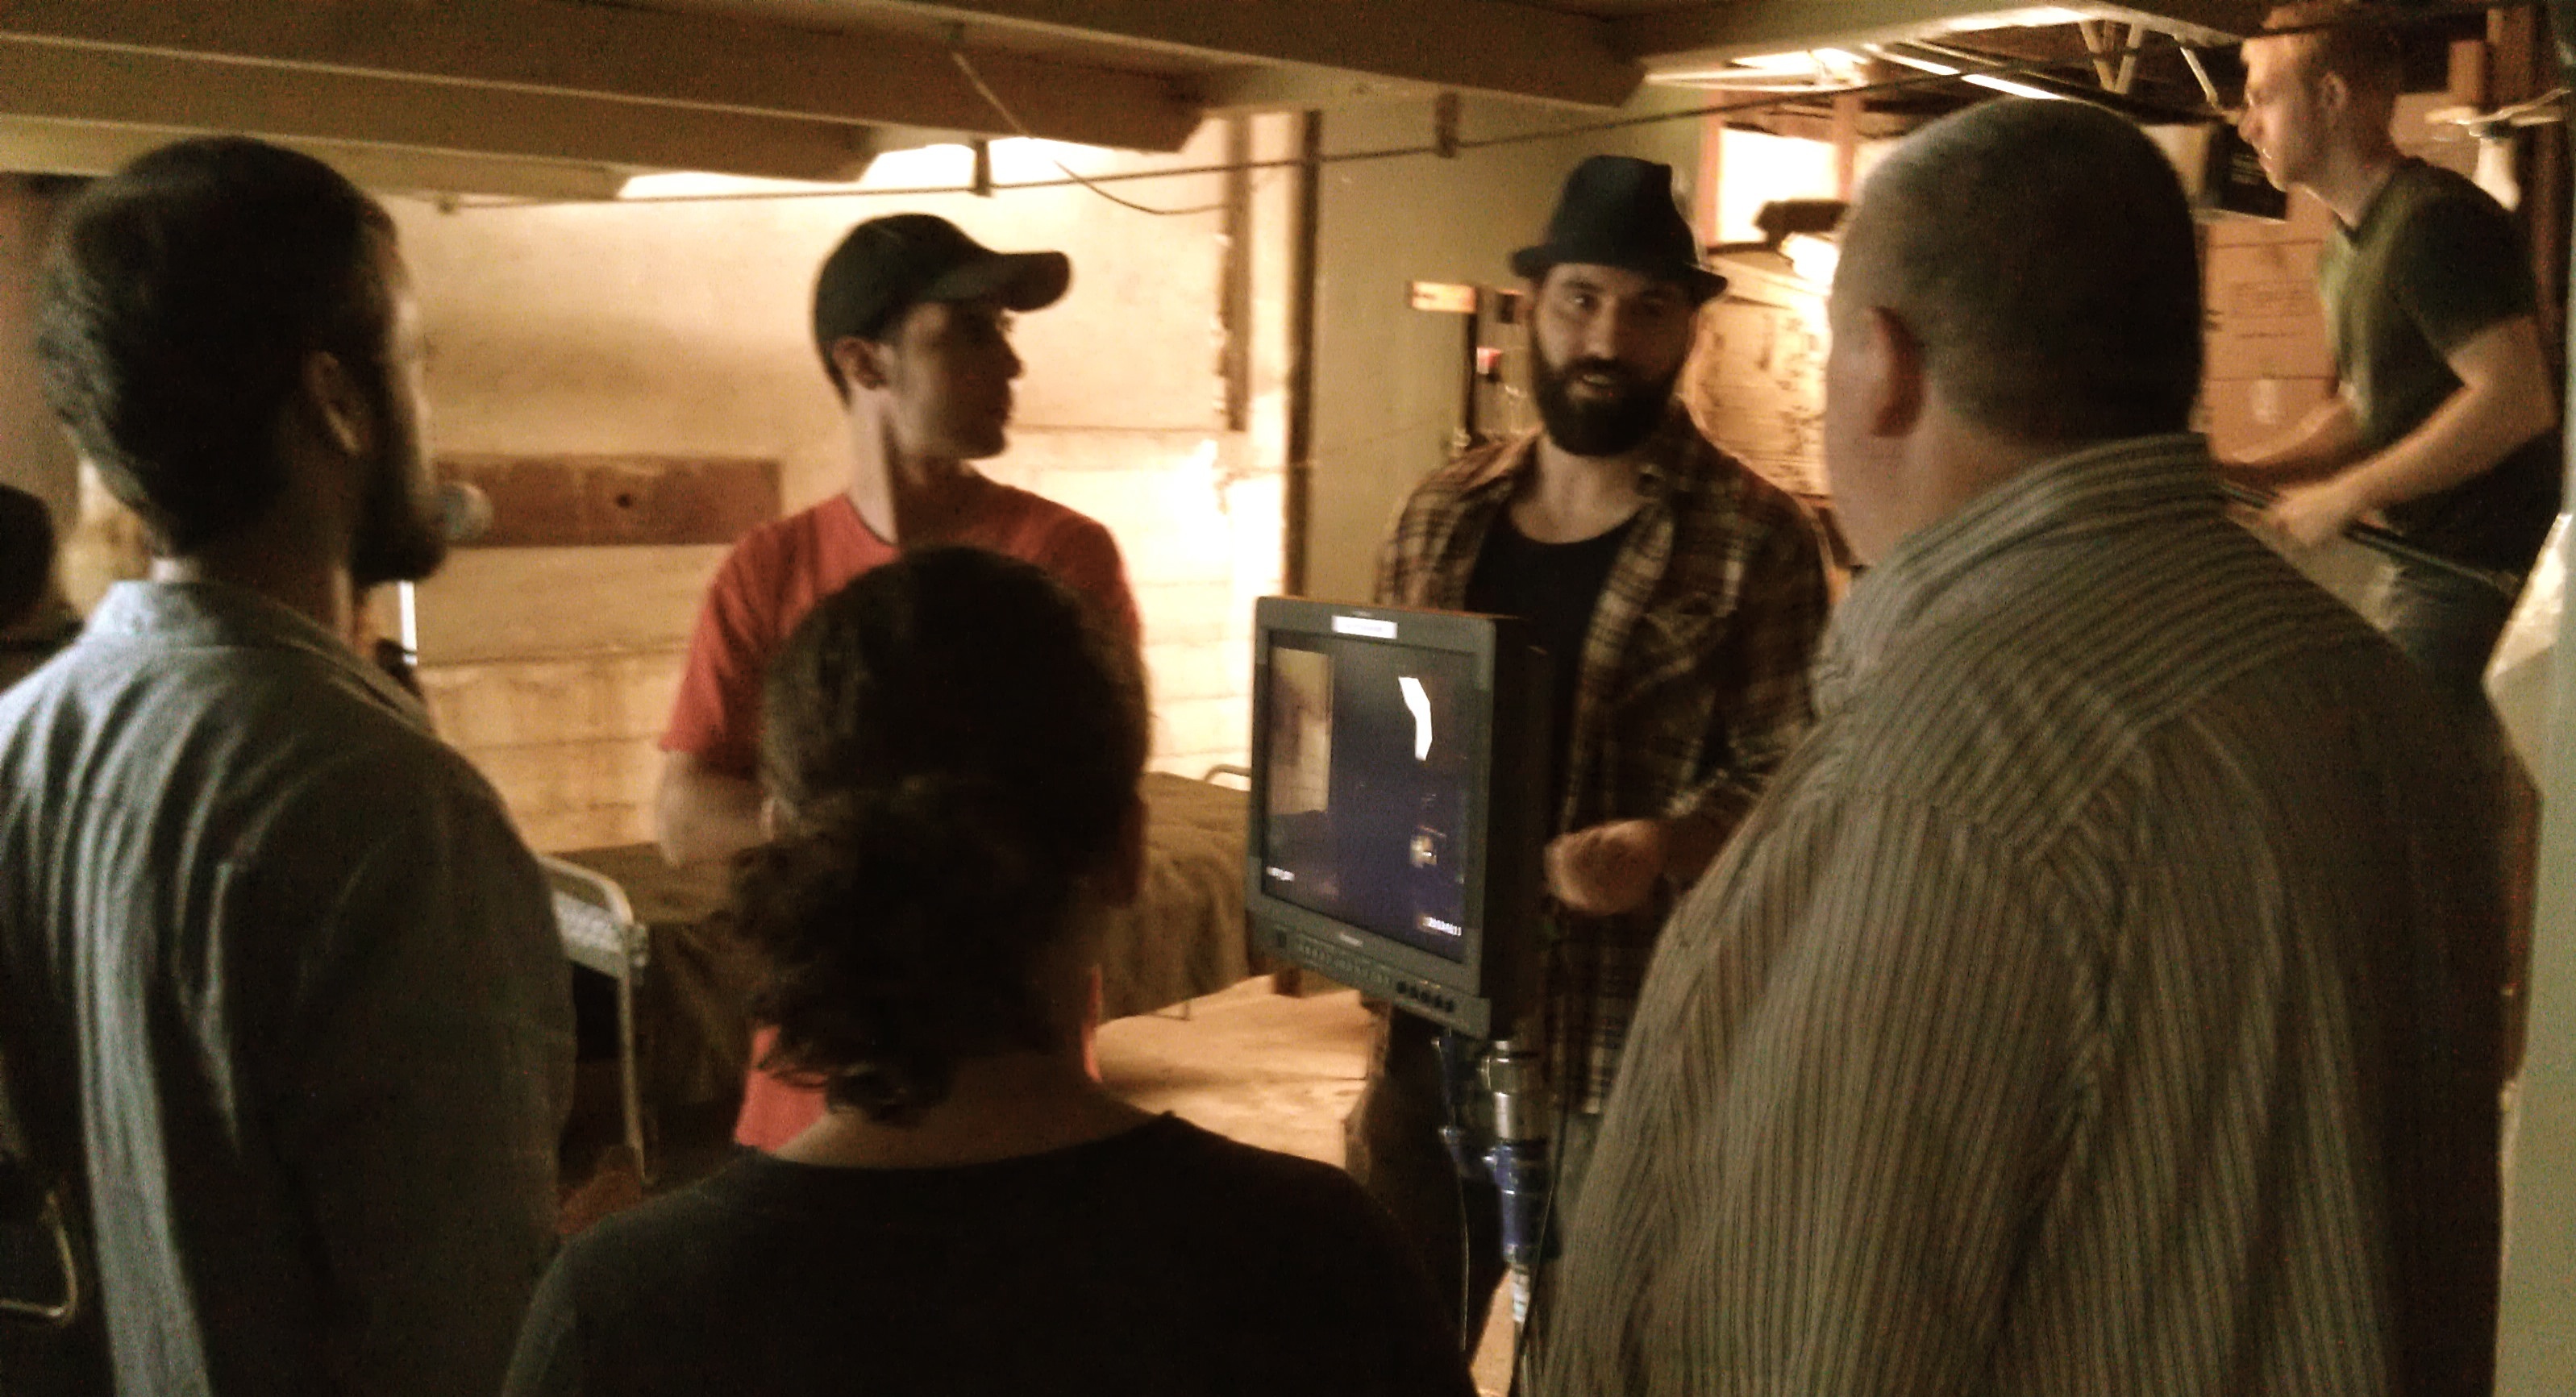 Behind the scenes with Director John Brian King, Redlands